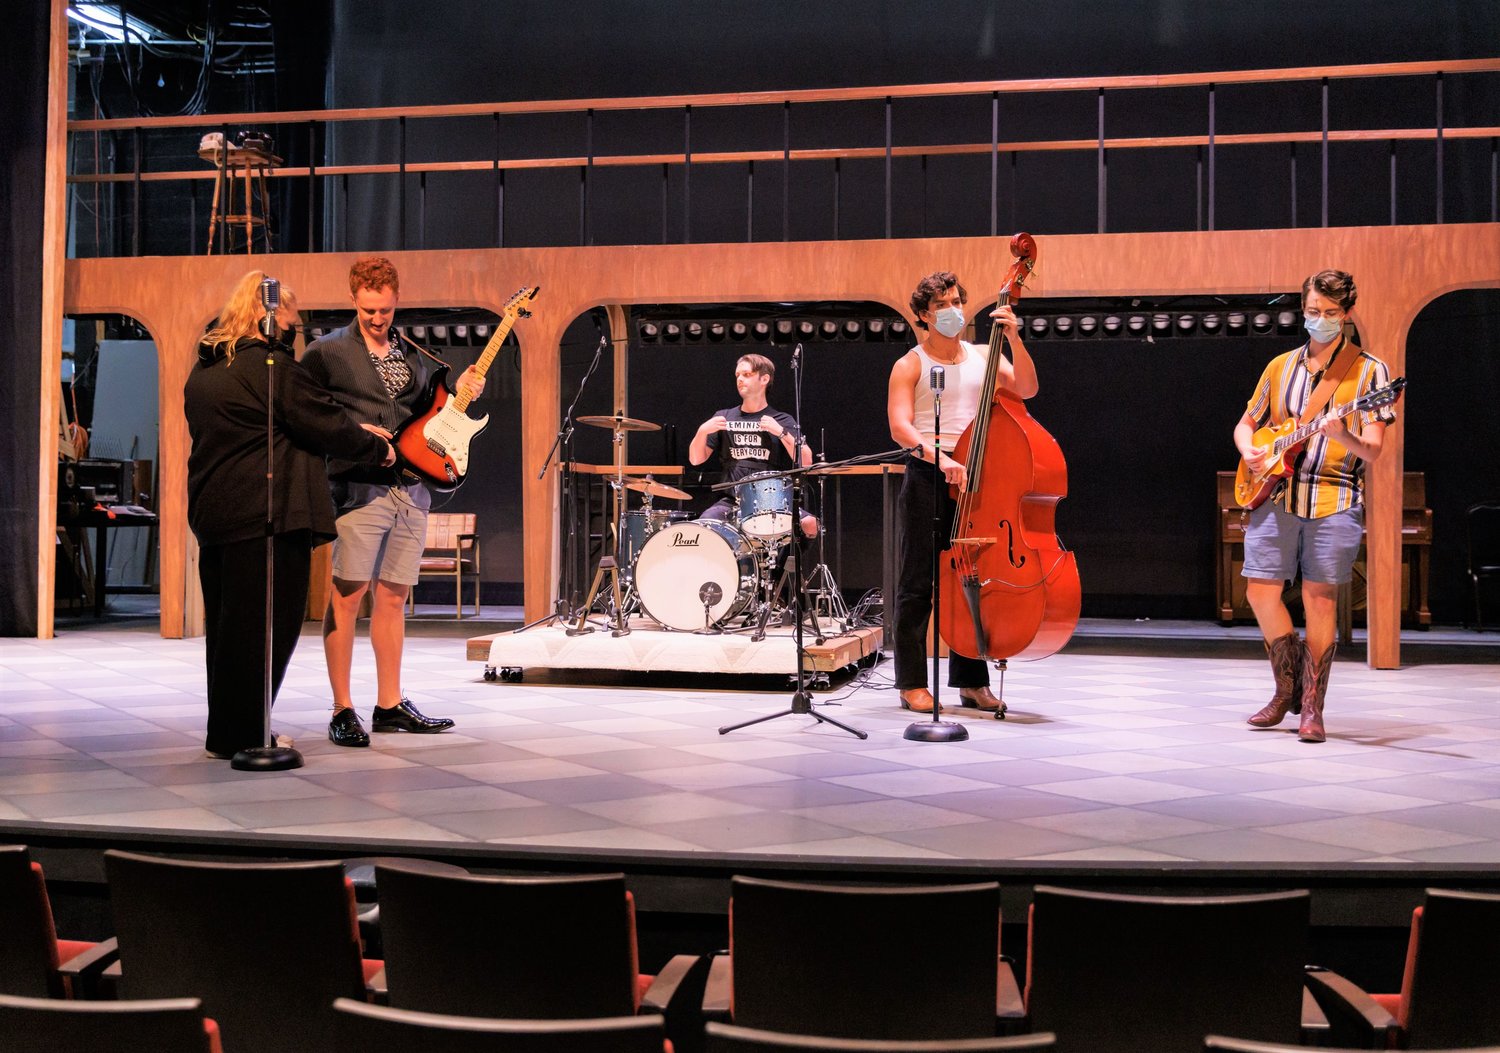 The cast of Cape Fear Regional Theatre's "Buddy: The Buddy Holly Story" get some technical direction on stage.